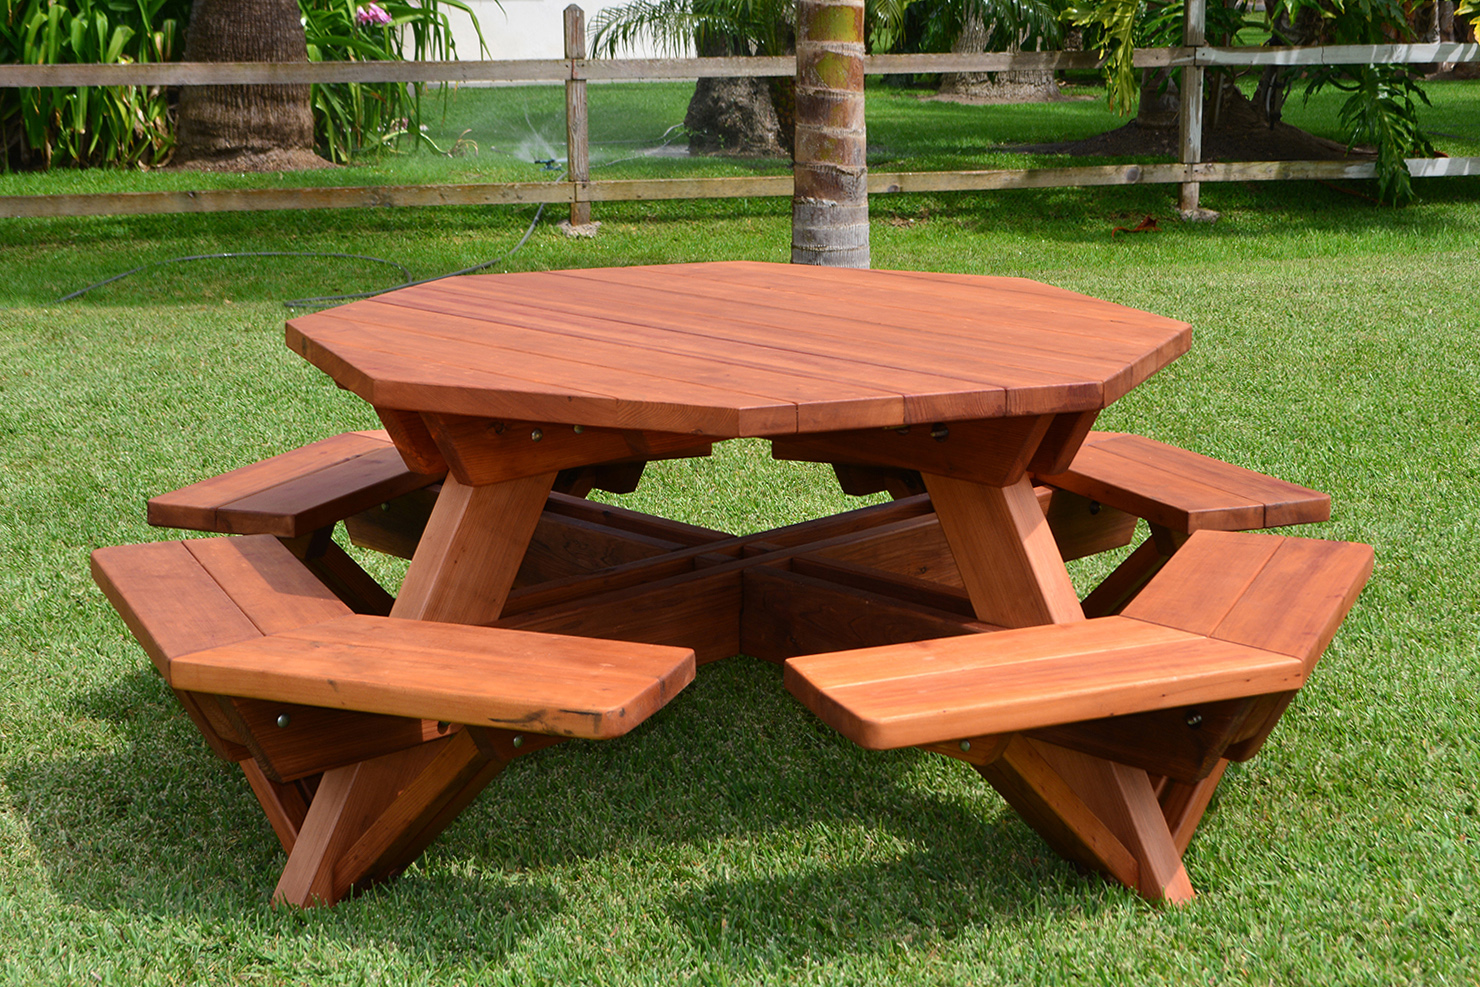 Octagon Picnic Table: Wood Picnic Table with Attached Bench